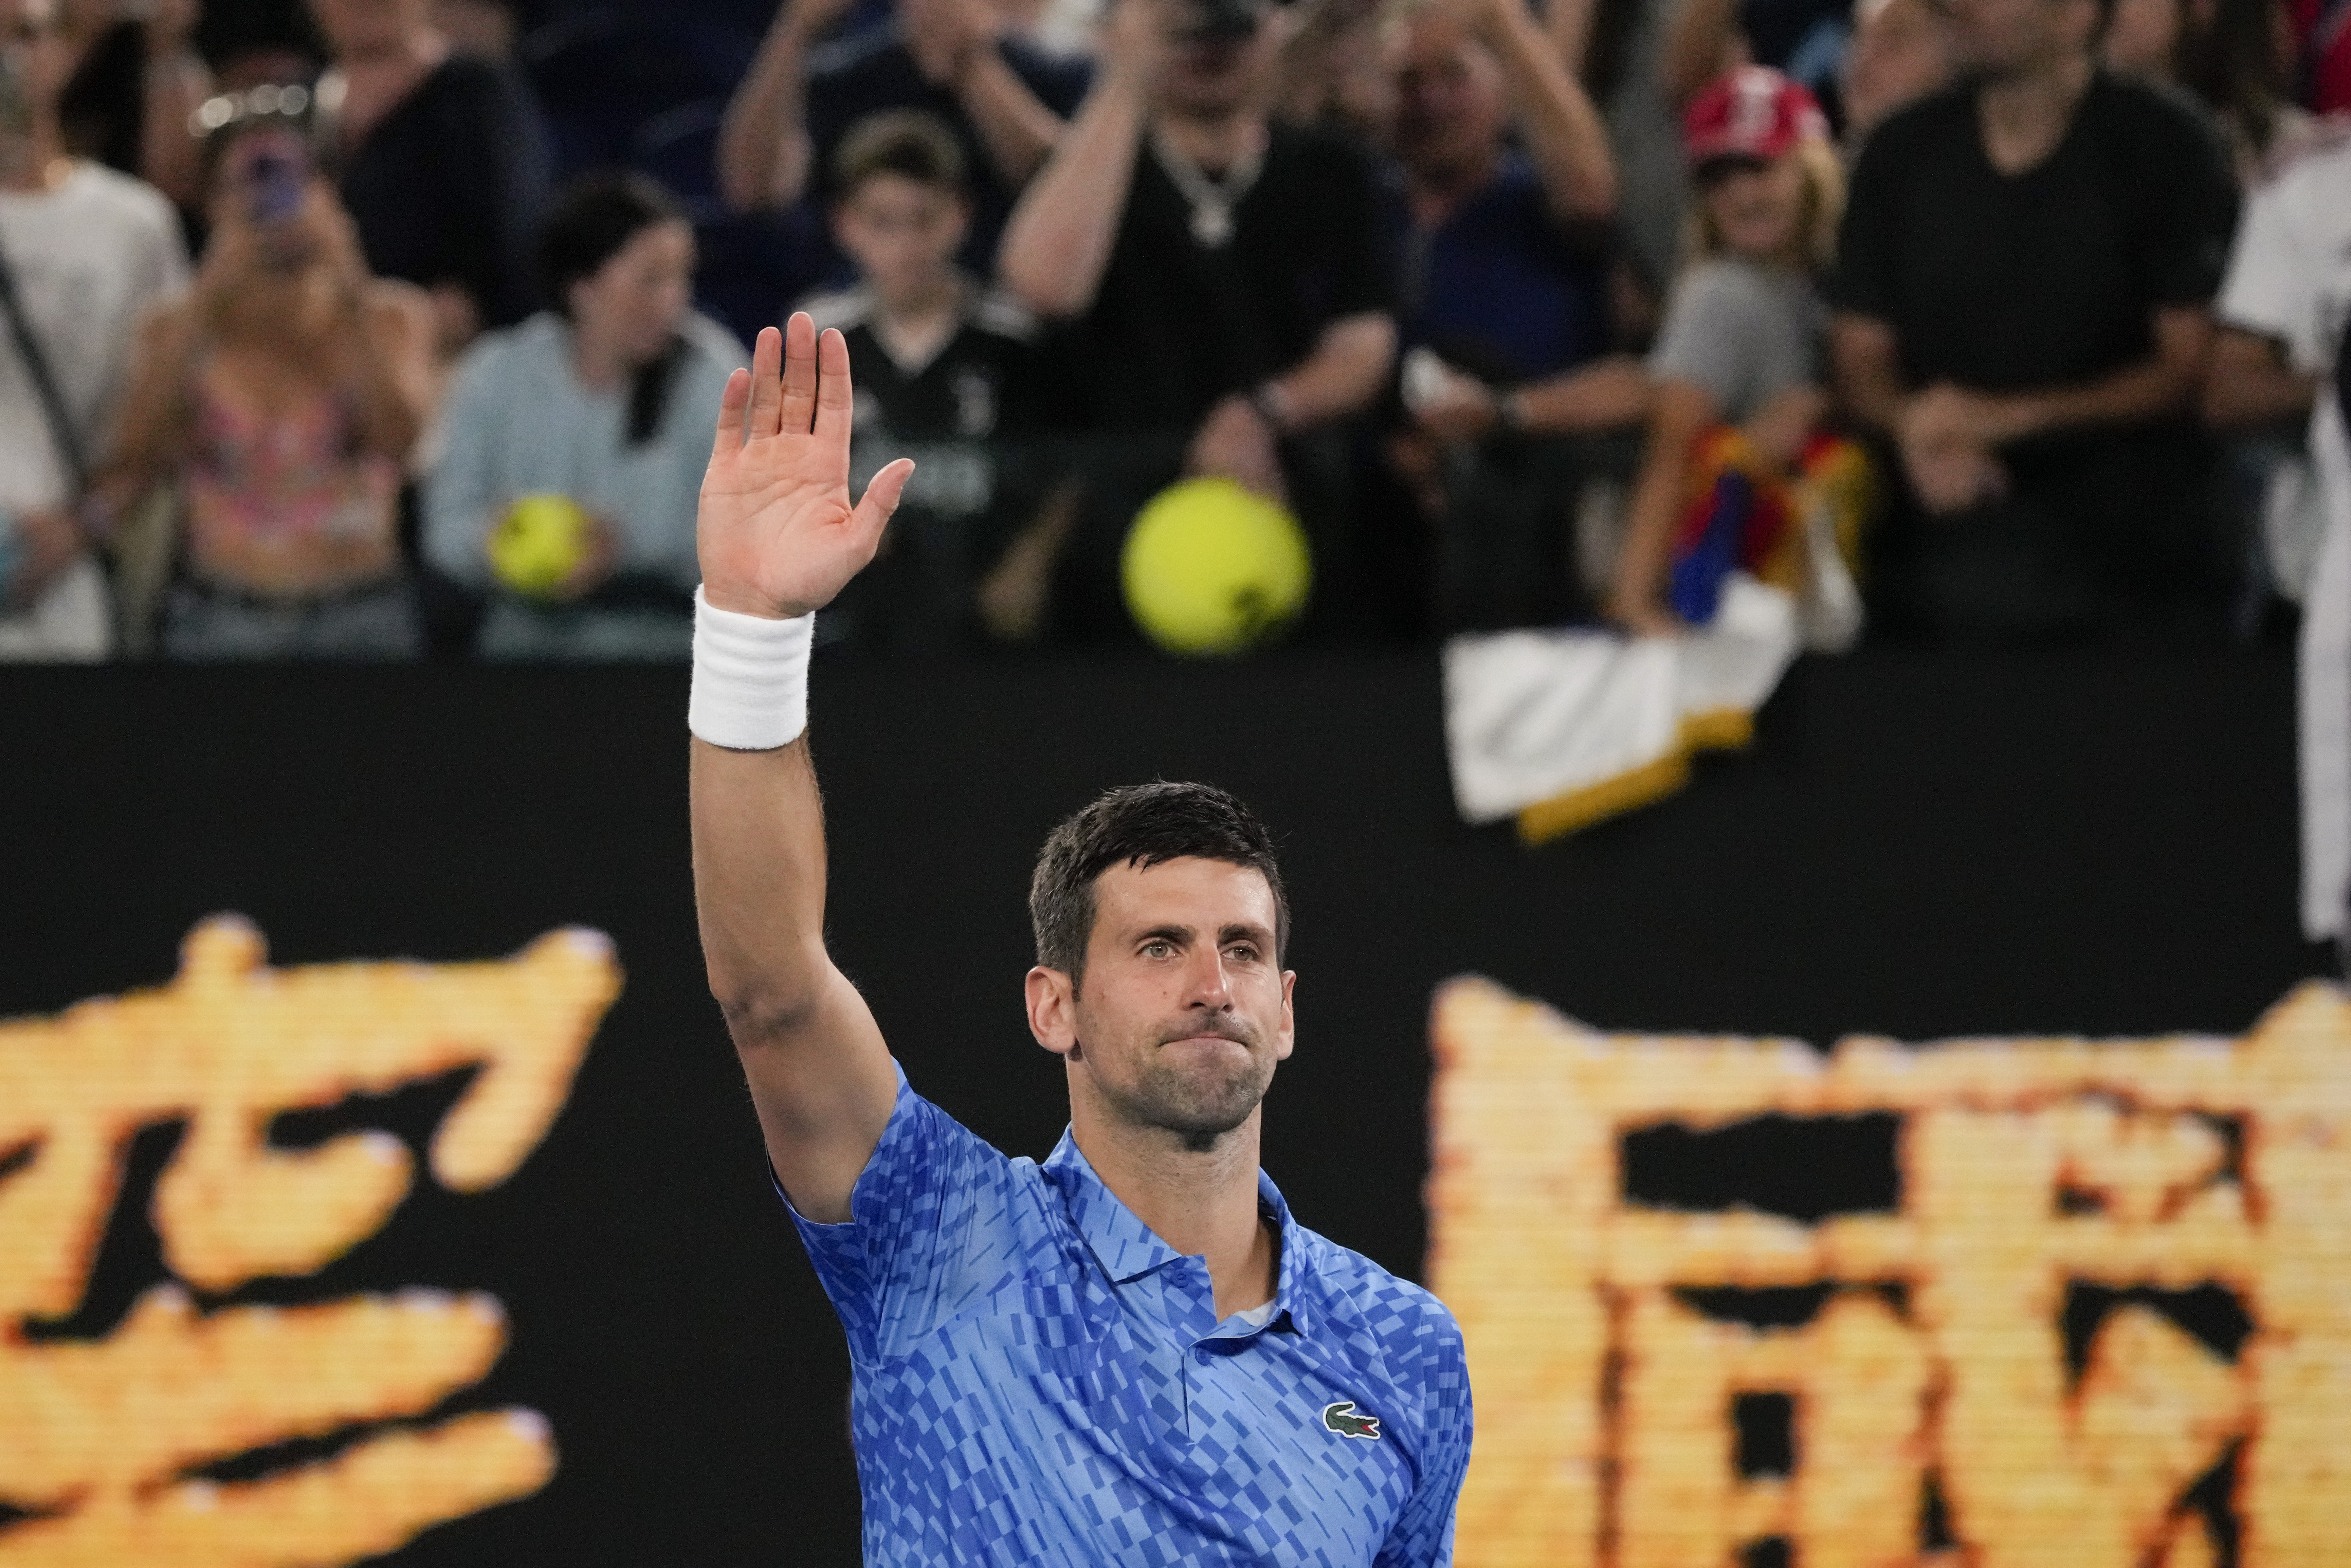 Novak Djokovic waves after beating Roberto Carballés Baena in the first round of the Australian Open, Wednesday, January 18, 2023, in Melbourne.  (AP Photo/Aaron Favila)